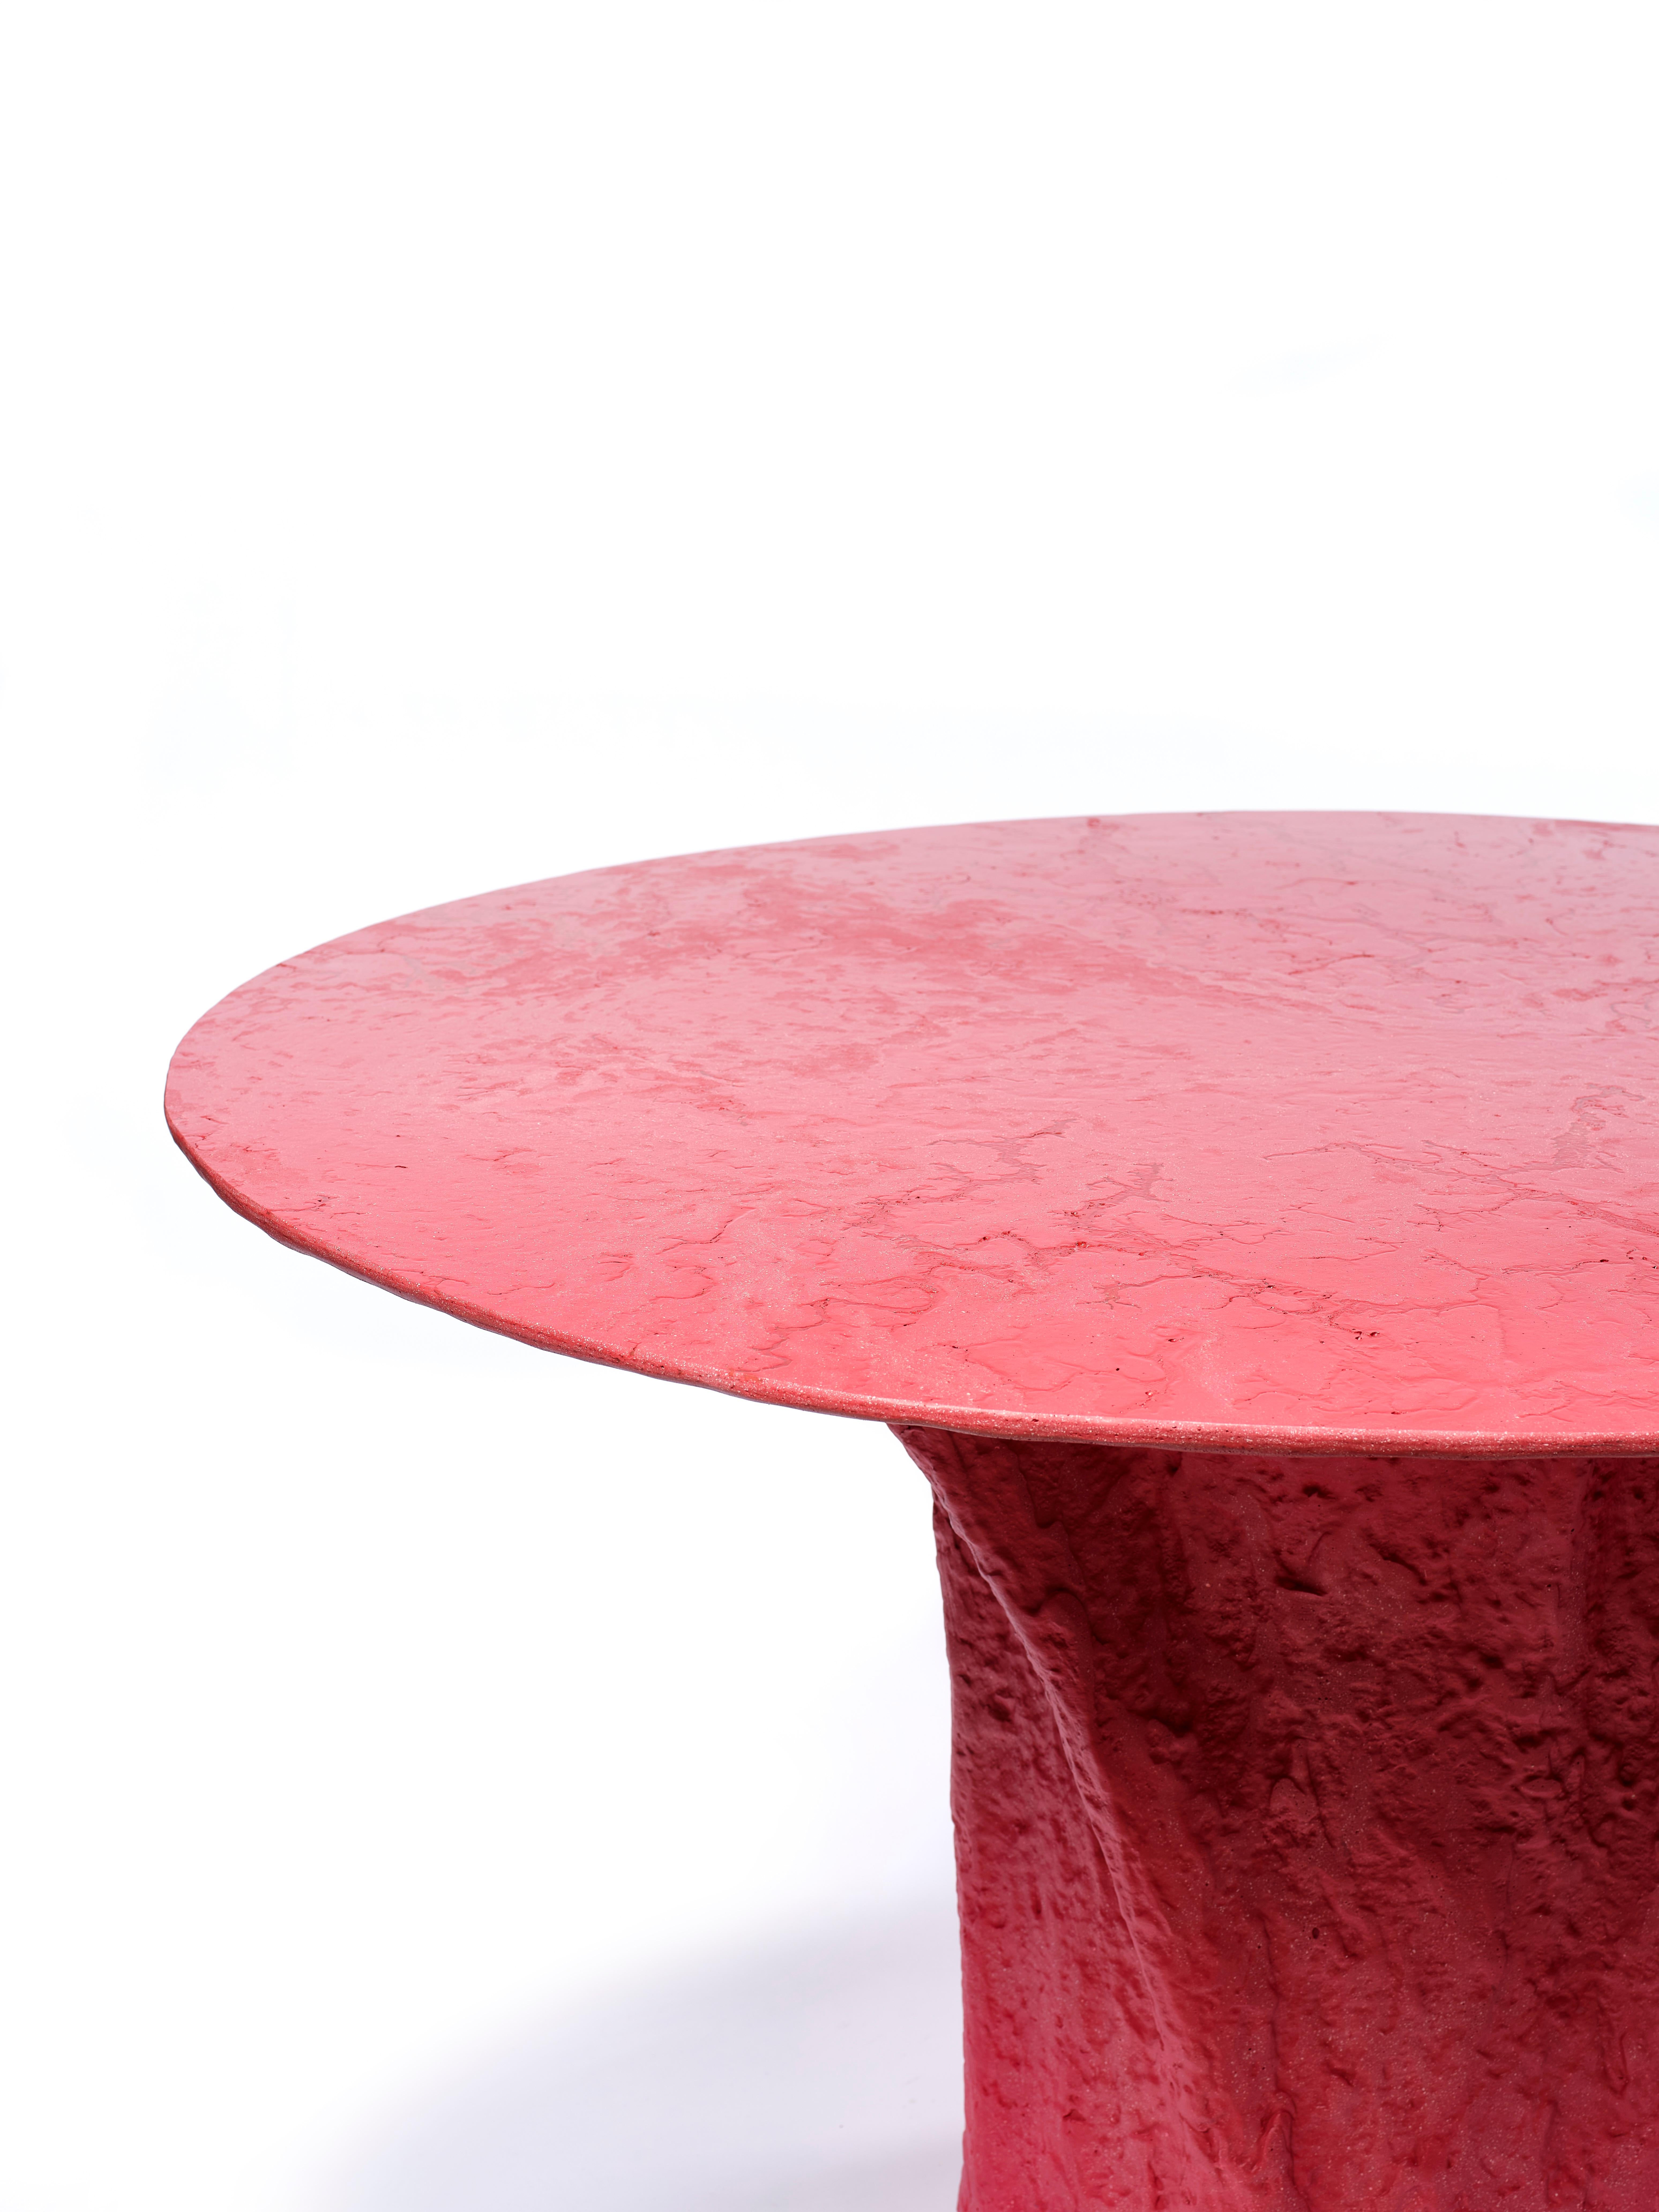 The red Kernel table is a unique piece made entirely by hand by the designer. Completely built in Glebanite, a special blend of recycled and recyclable fiberglass. An artistic work of circular economy that takes care of the planet earth and our